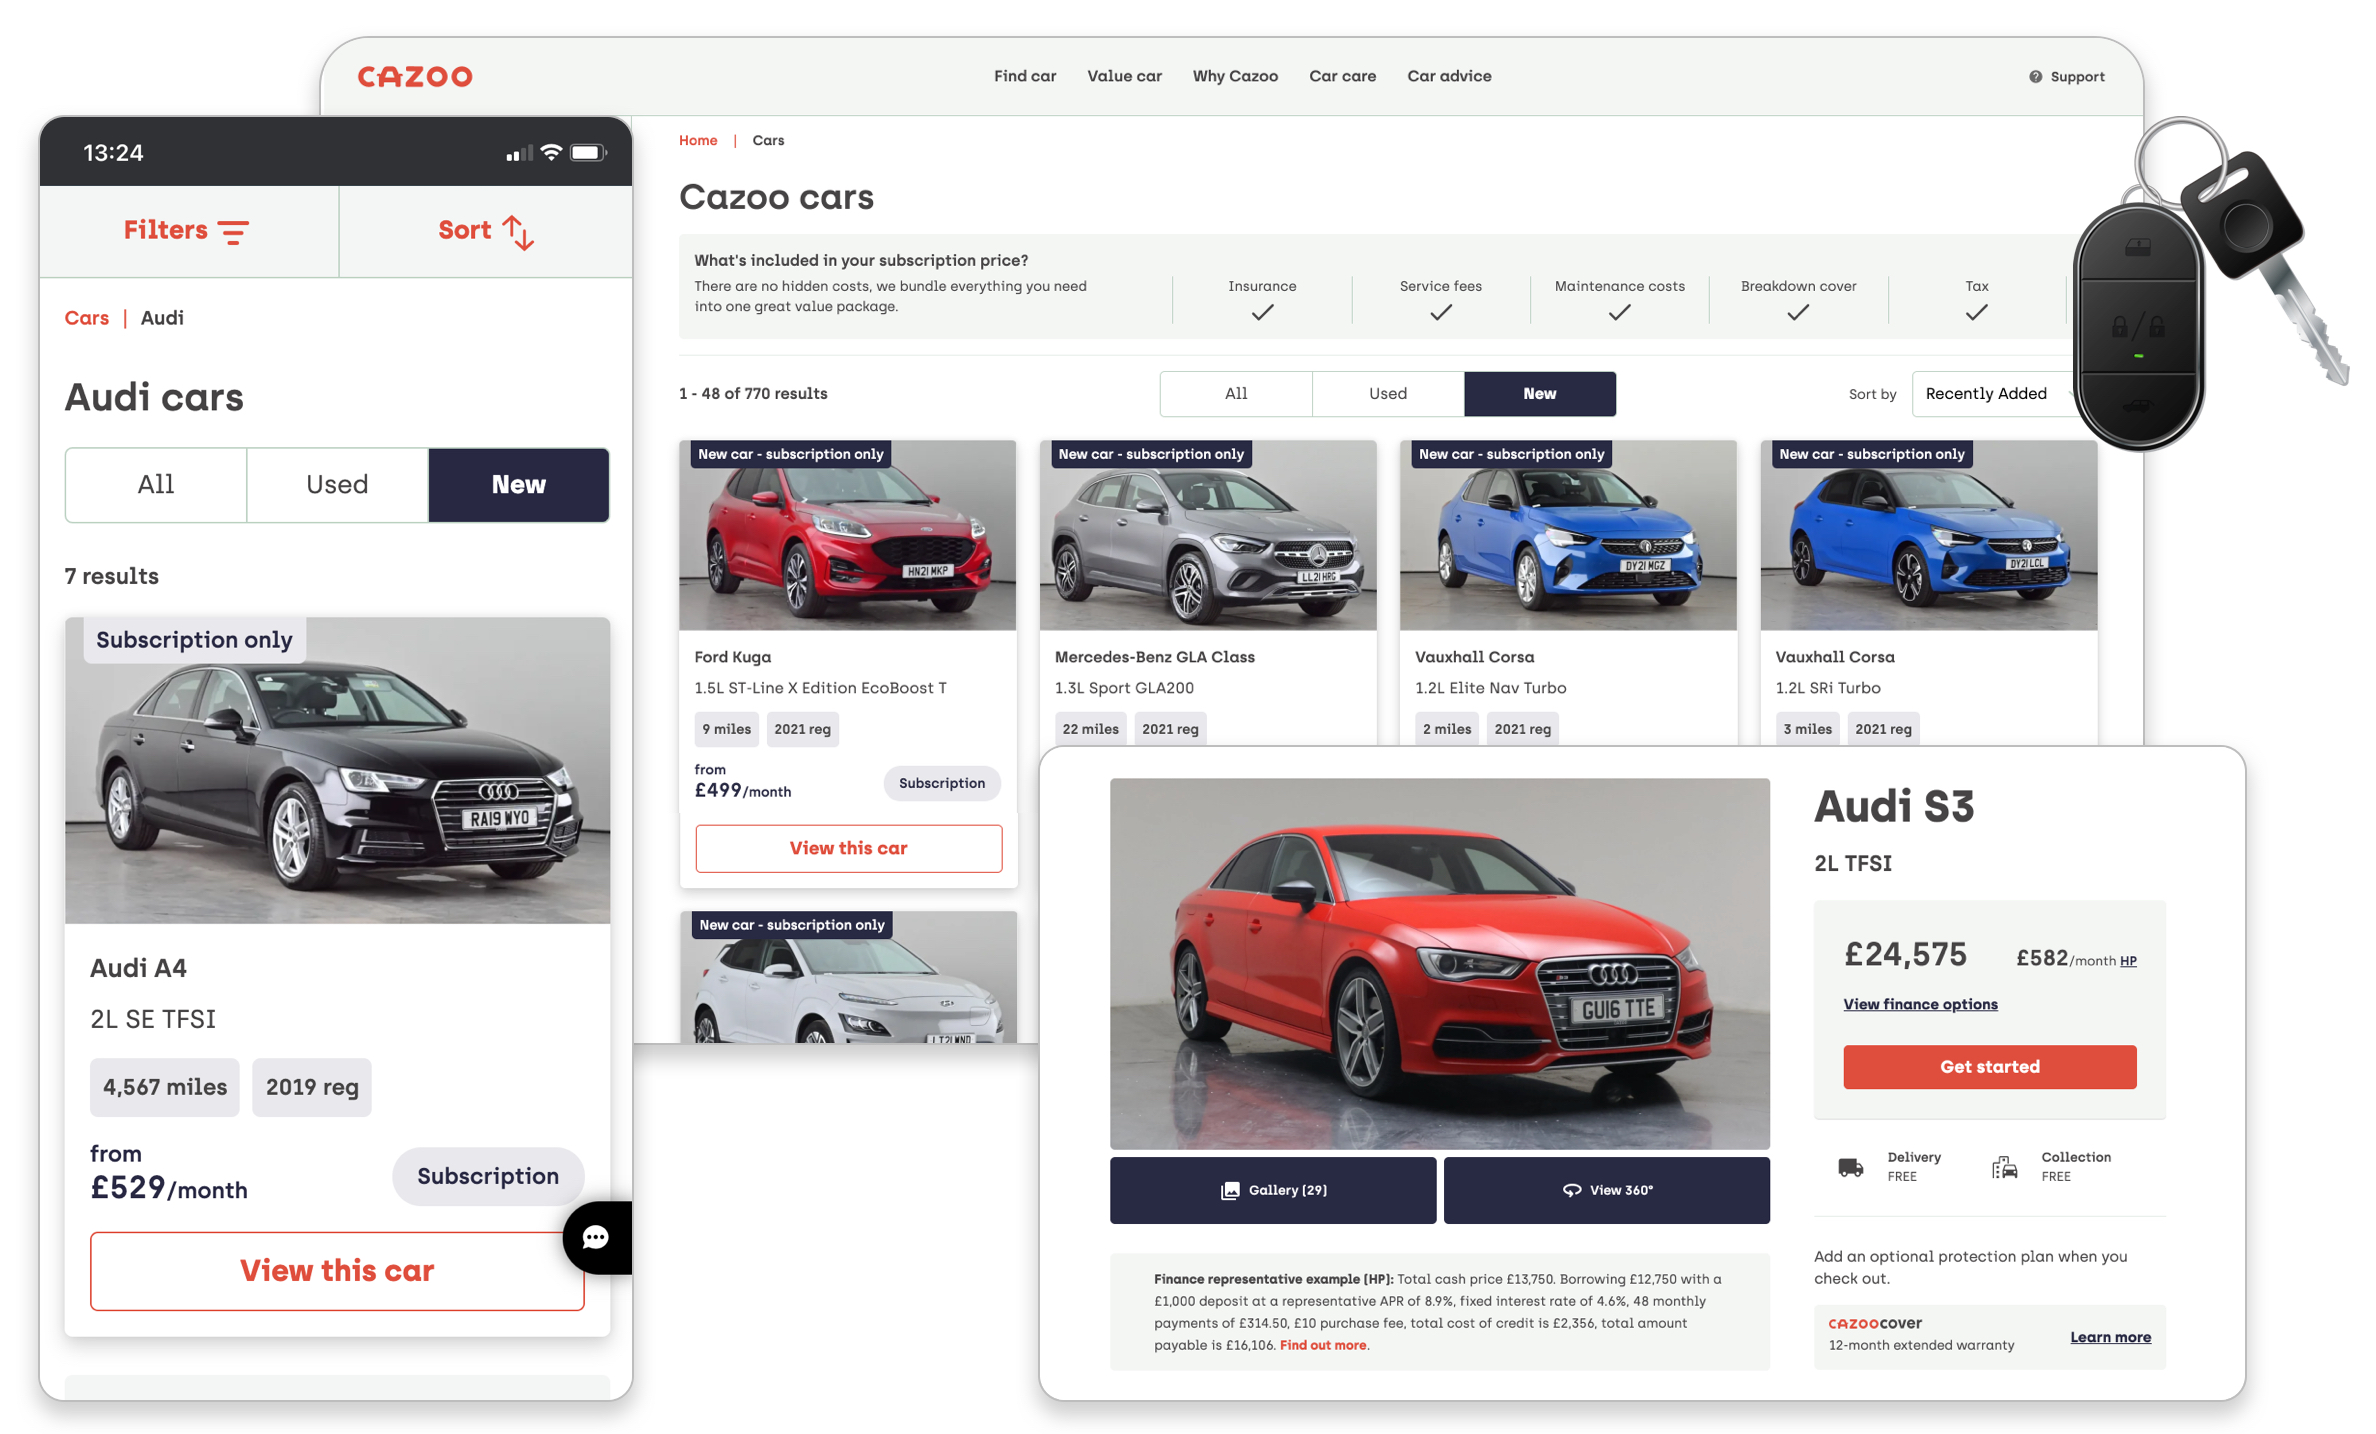 Cazoo's headless, microservices-based commerce platform allows them to develop sales sites and channels that are unique in the automotive industry